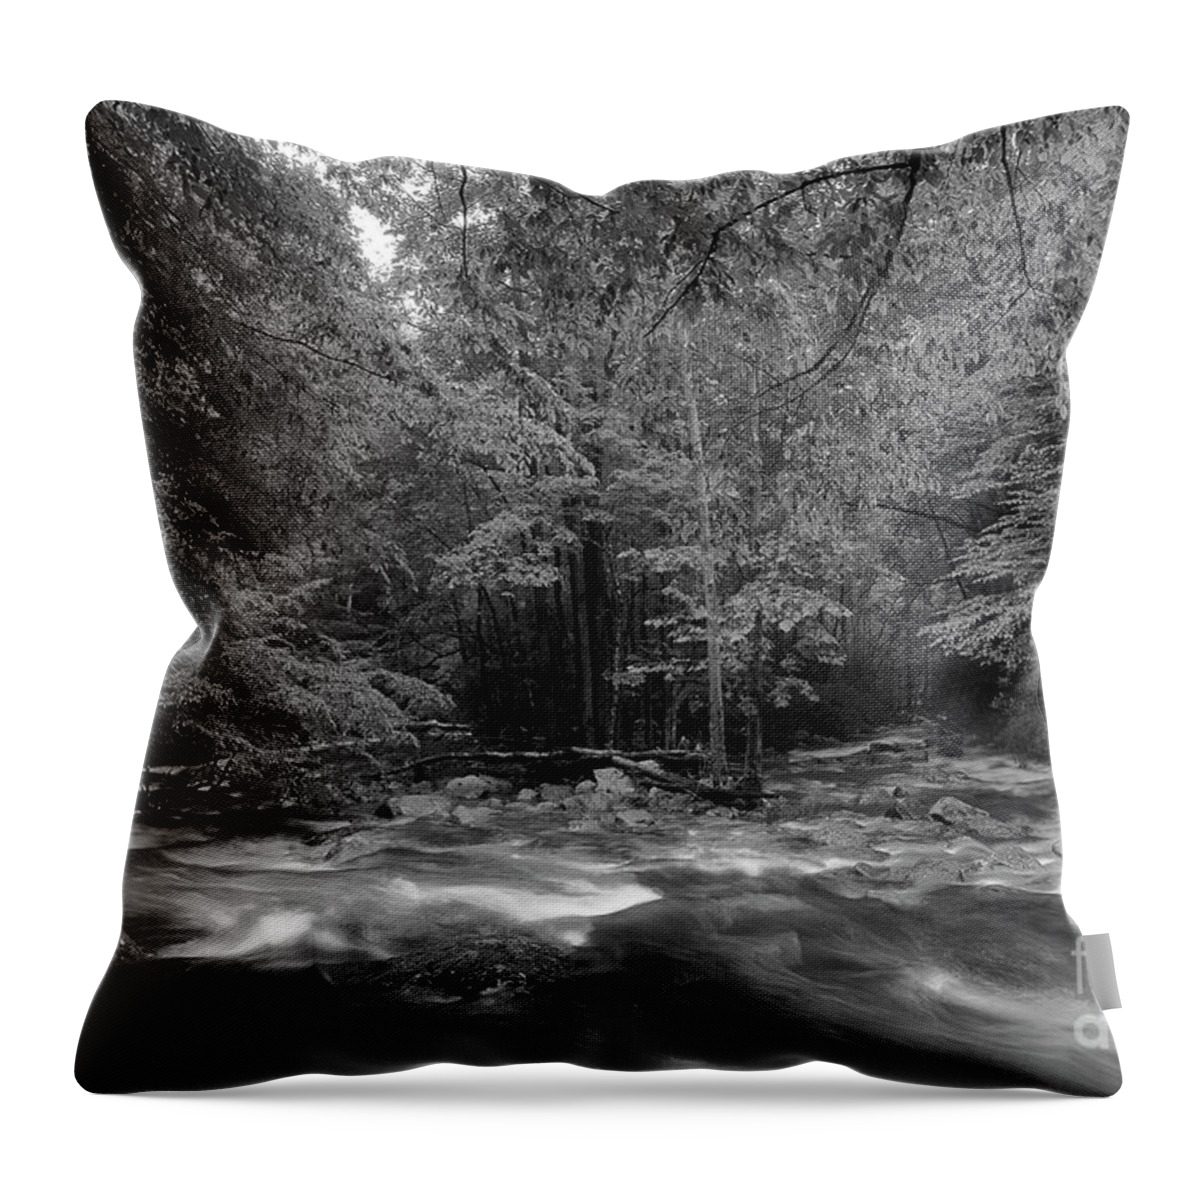 River Throw Pillow featuring the photograph The River Forges On by Mike Eingle